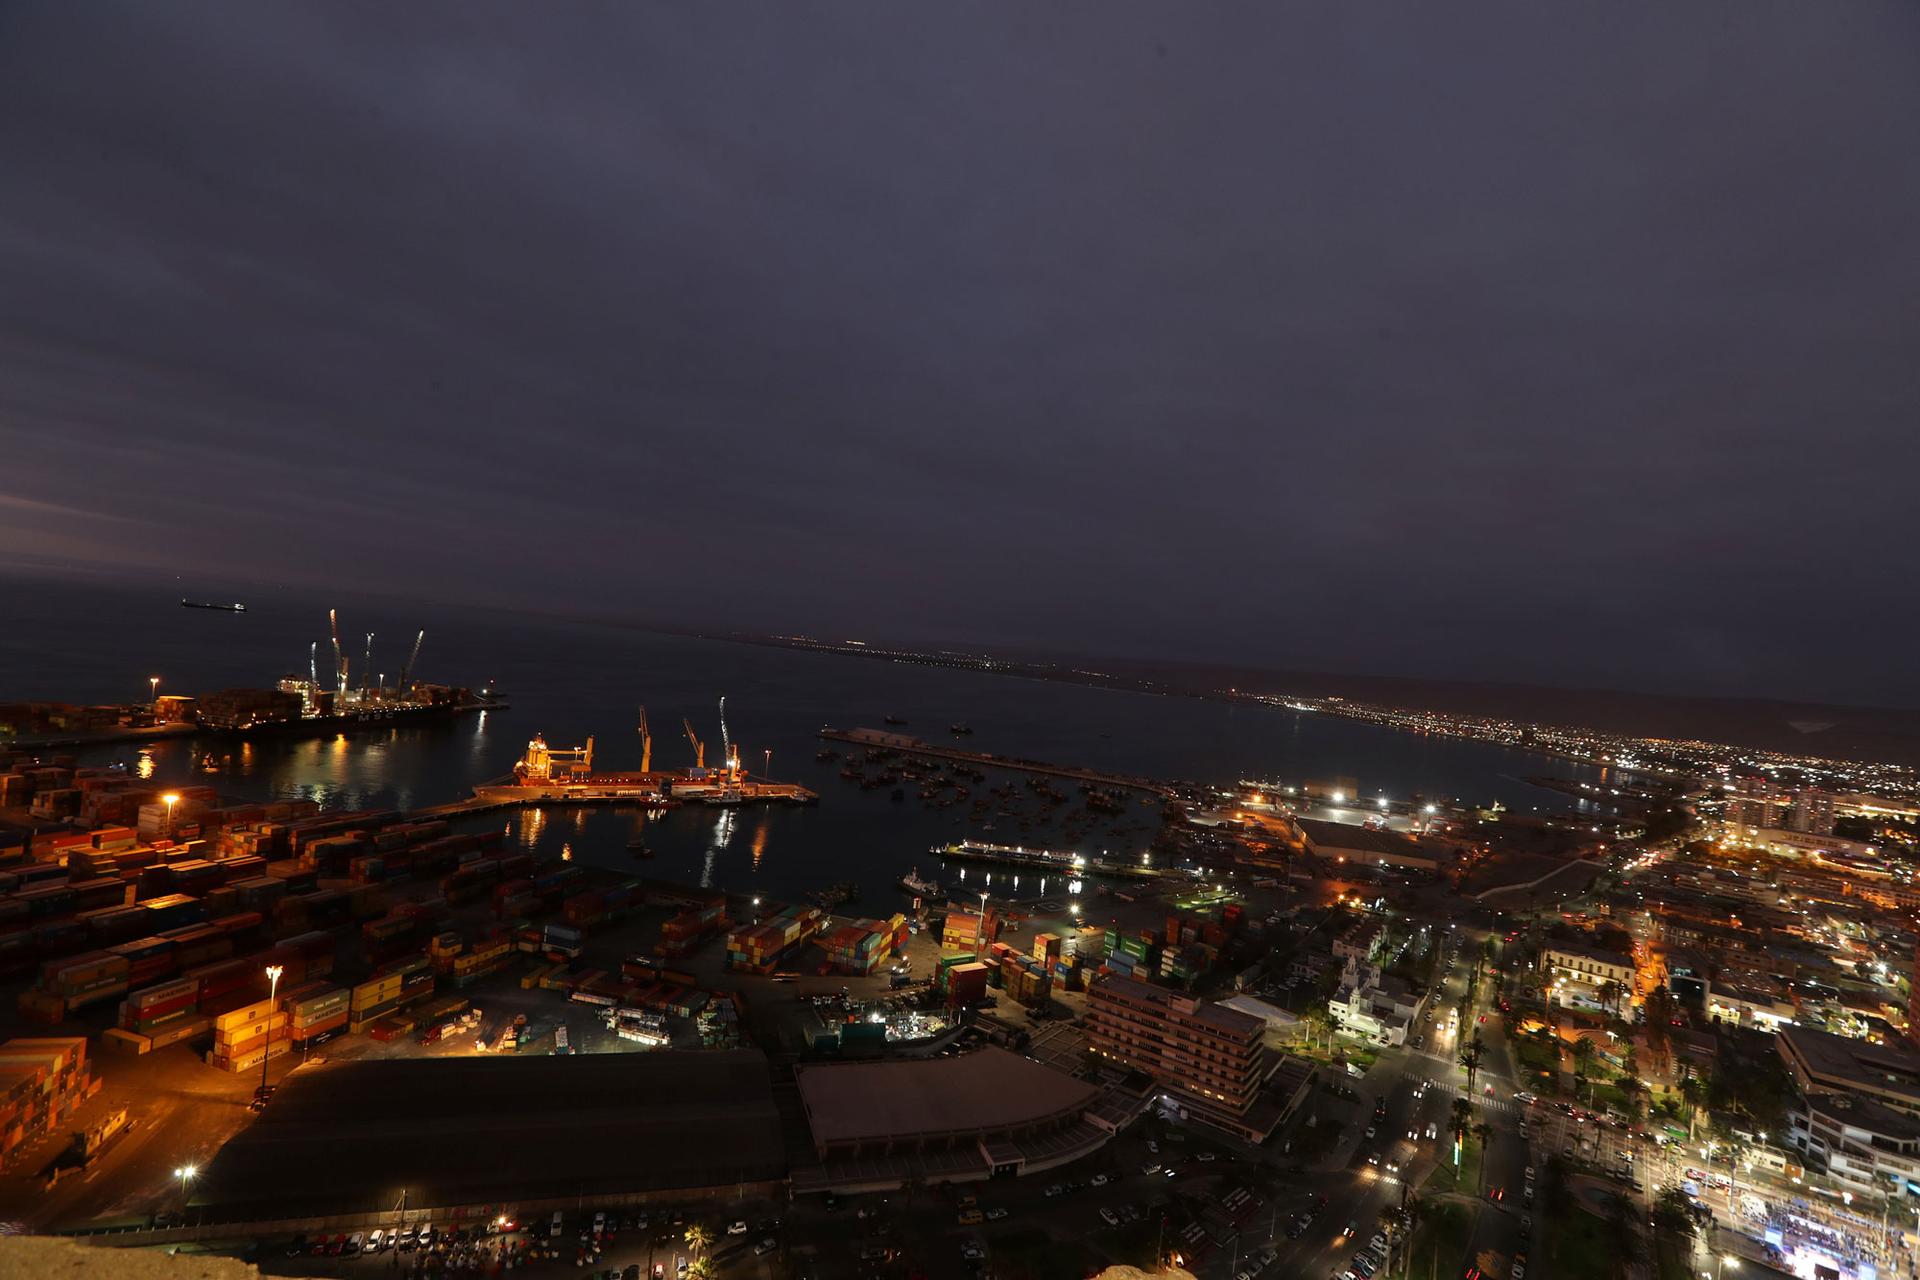 In this wide angle photo taken at dusk, Arica city is shown with shipping facilities on the water.